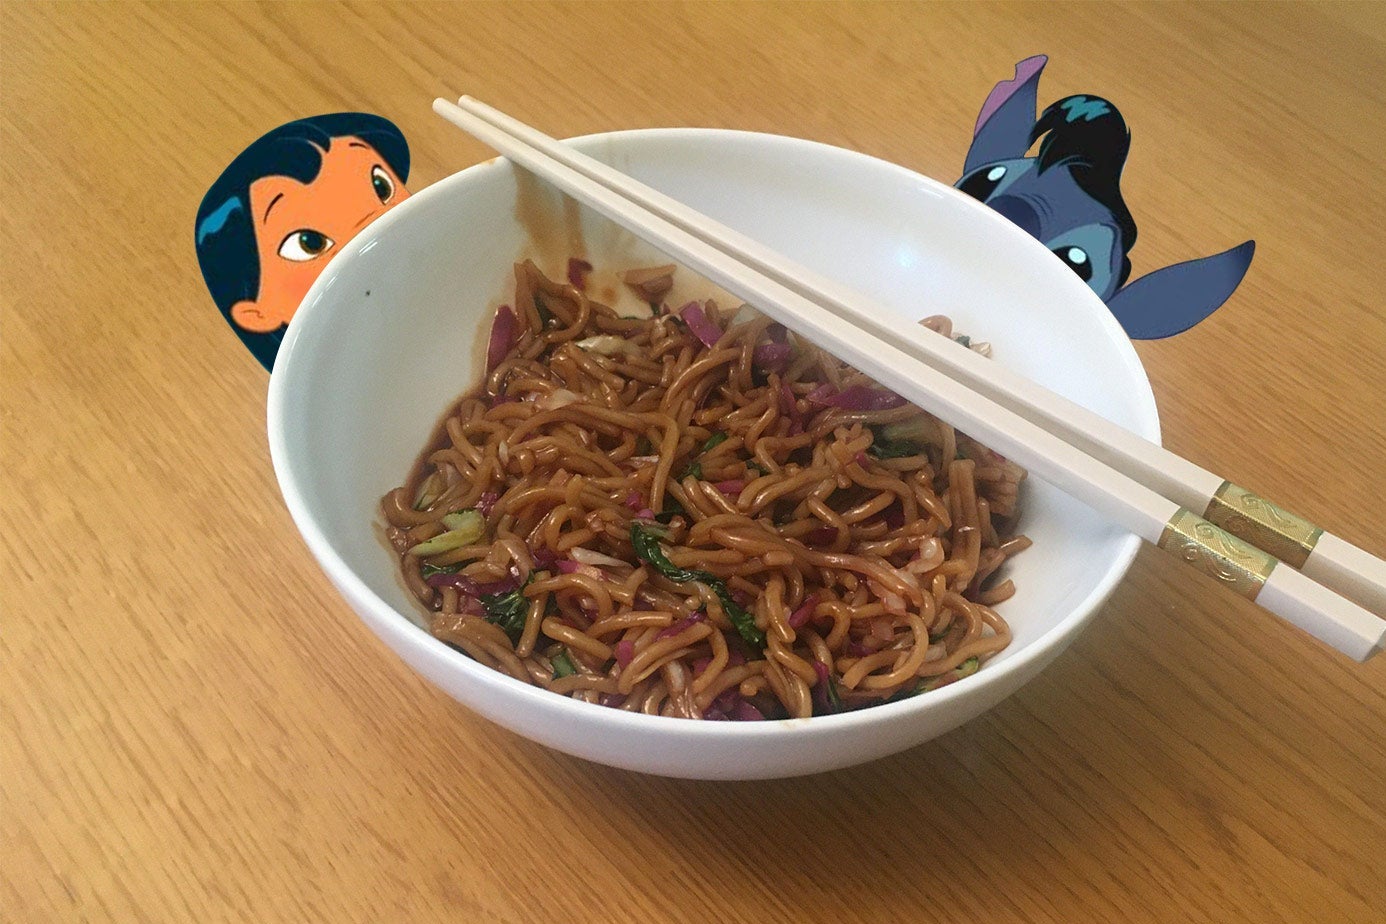 A photo of a bowl of heavily sauced, stir-fried noodles. Peeking over the edge of the bowl are Lilo and Stitch.